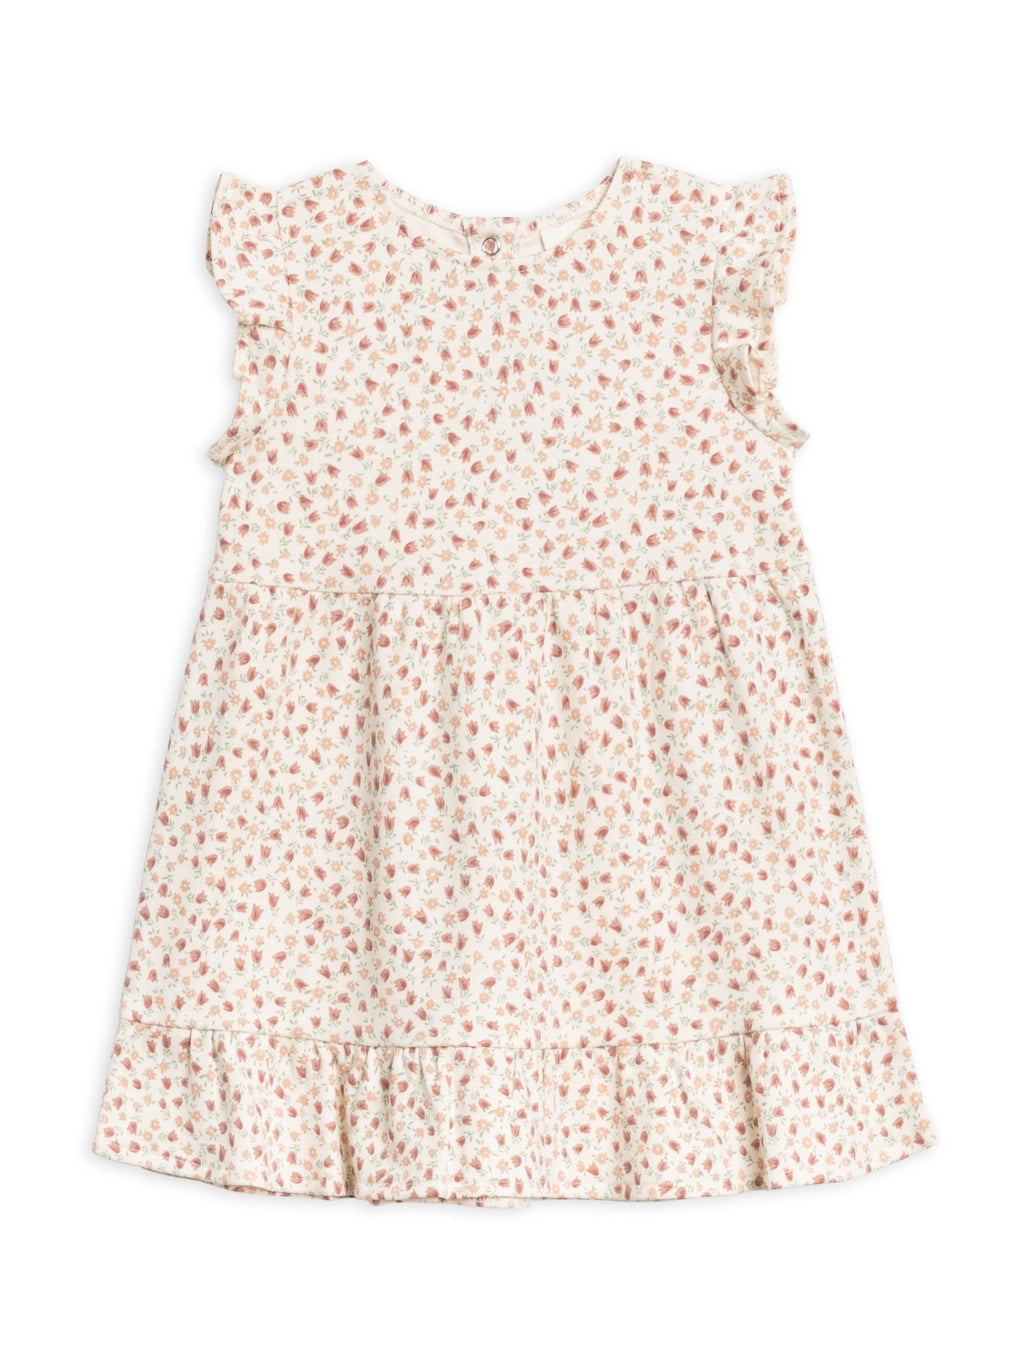 Colored Organics Baby & Kids Tilly Tiered Dress-Joy Floral